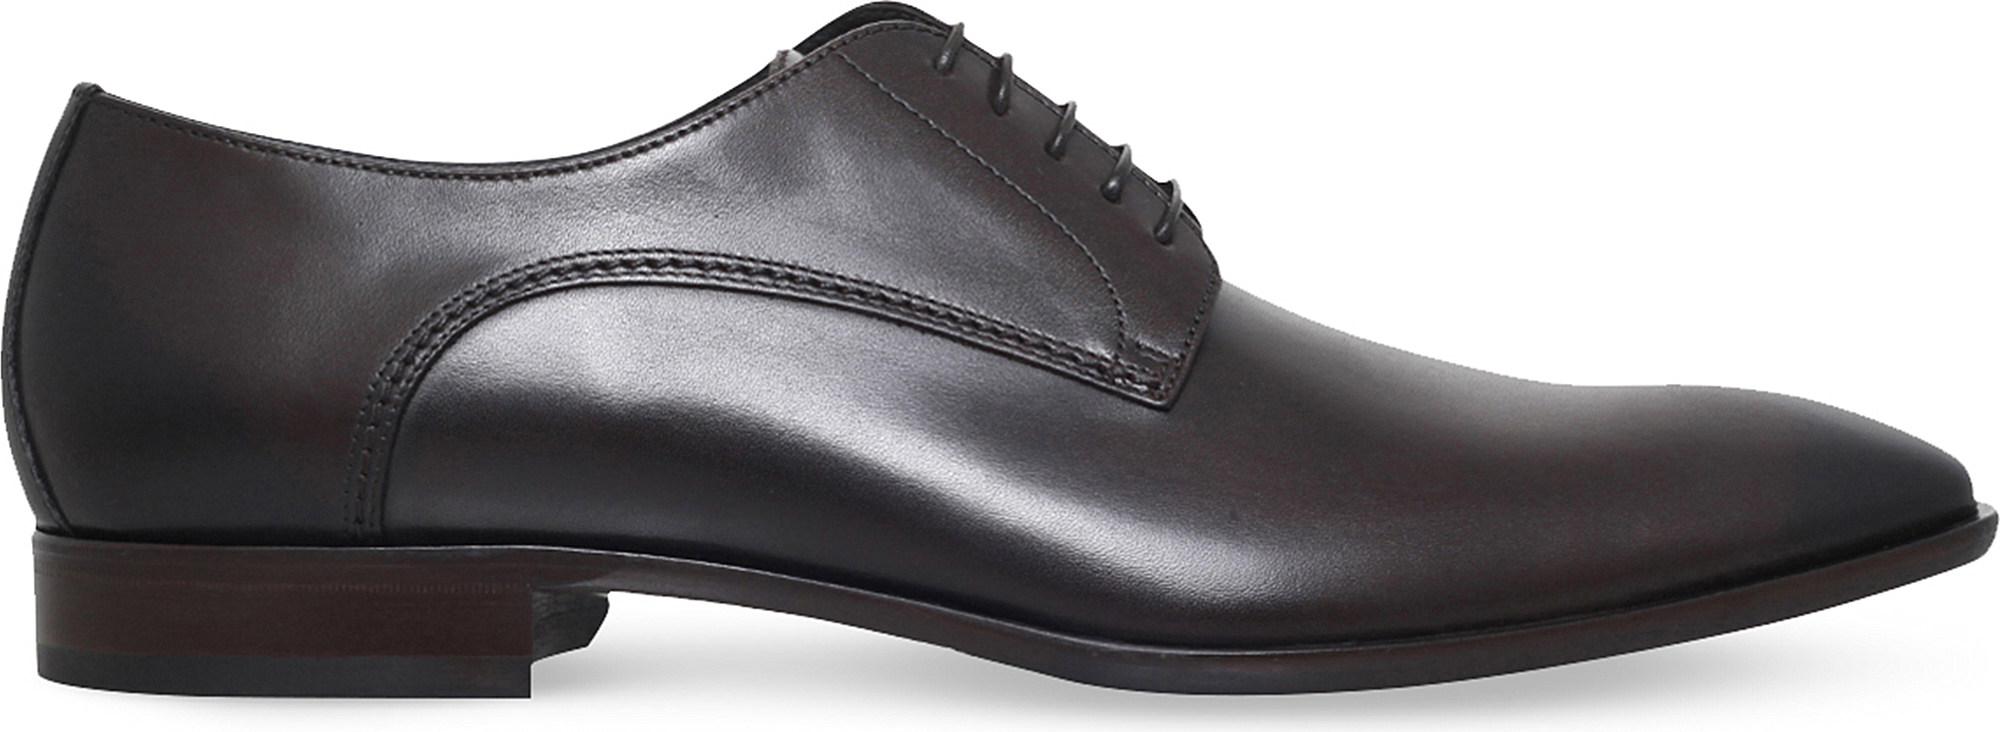 BOSS by HUGO BOSS Hugo Carmons Leather Derby Shoes in Dark Brown (Brown)  for Men - Lyst